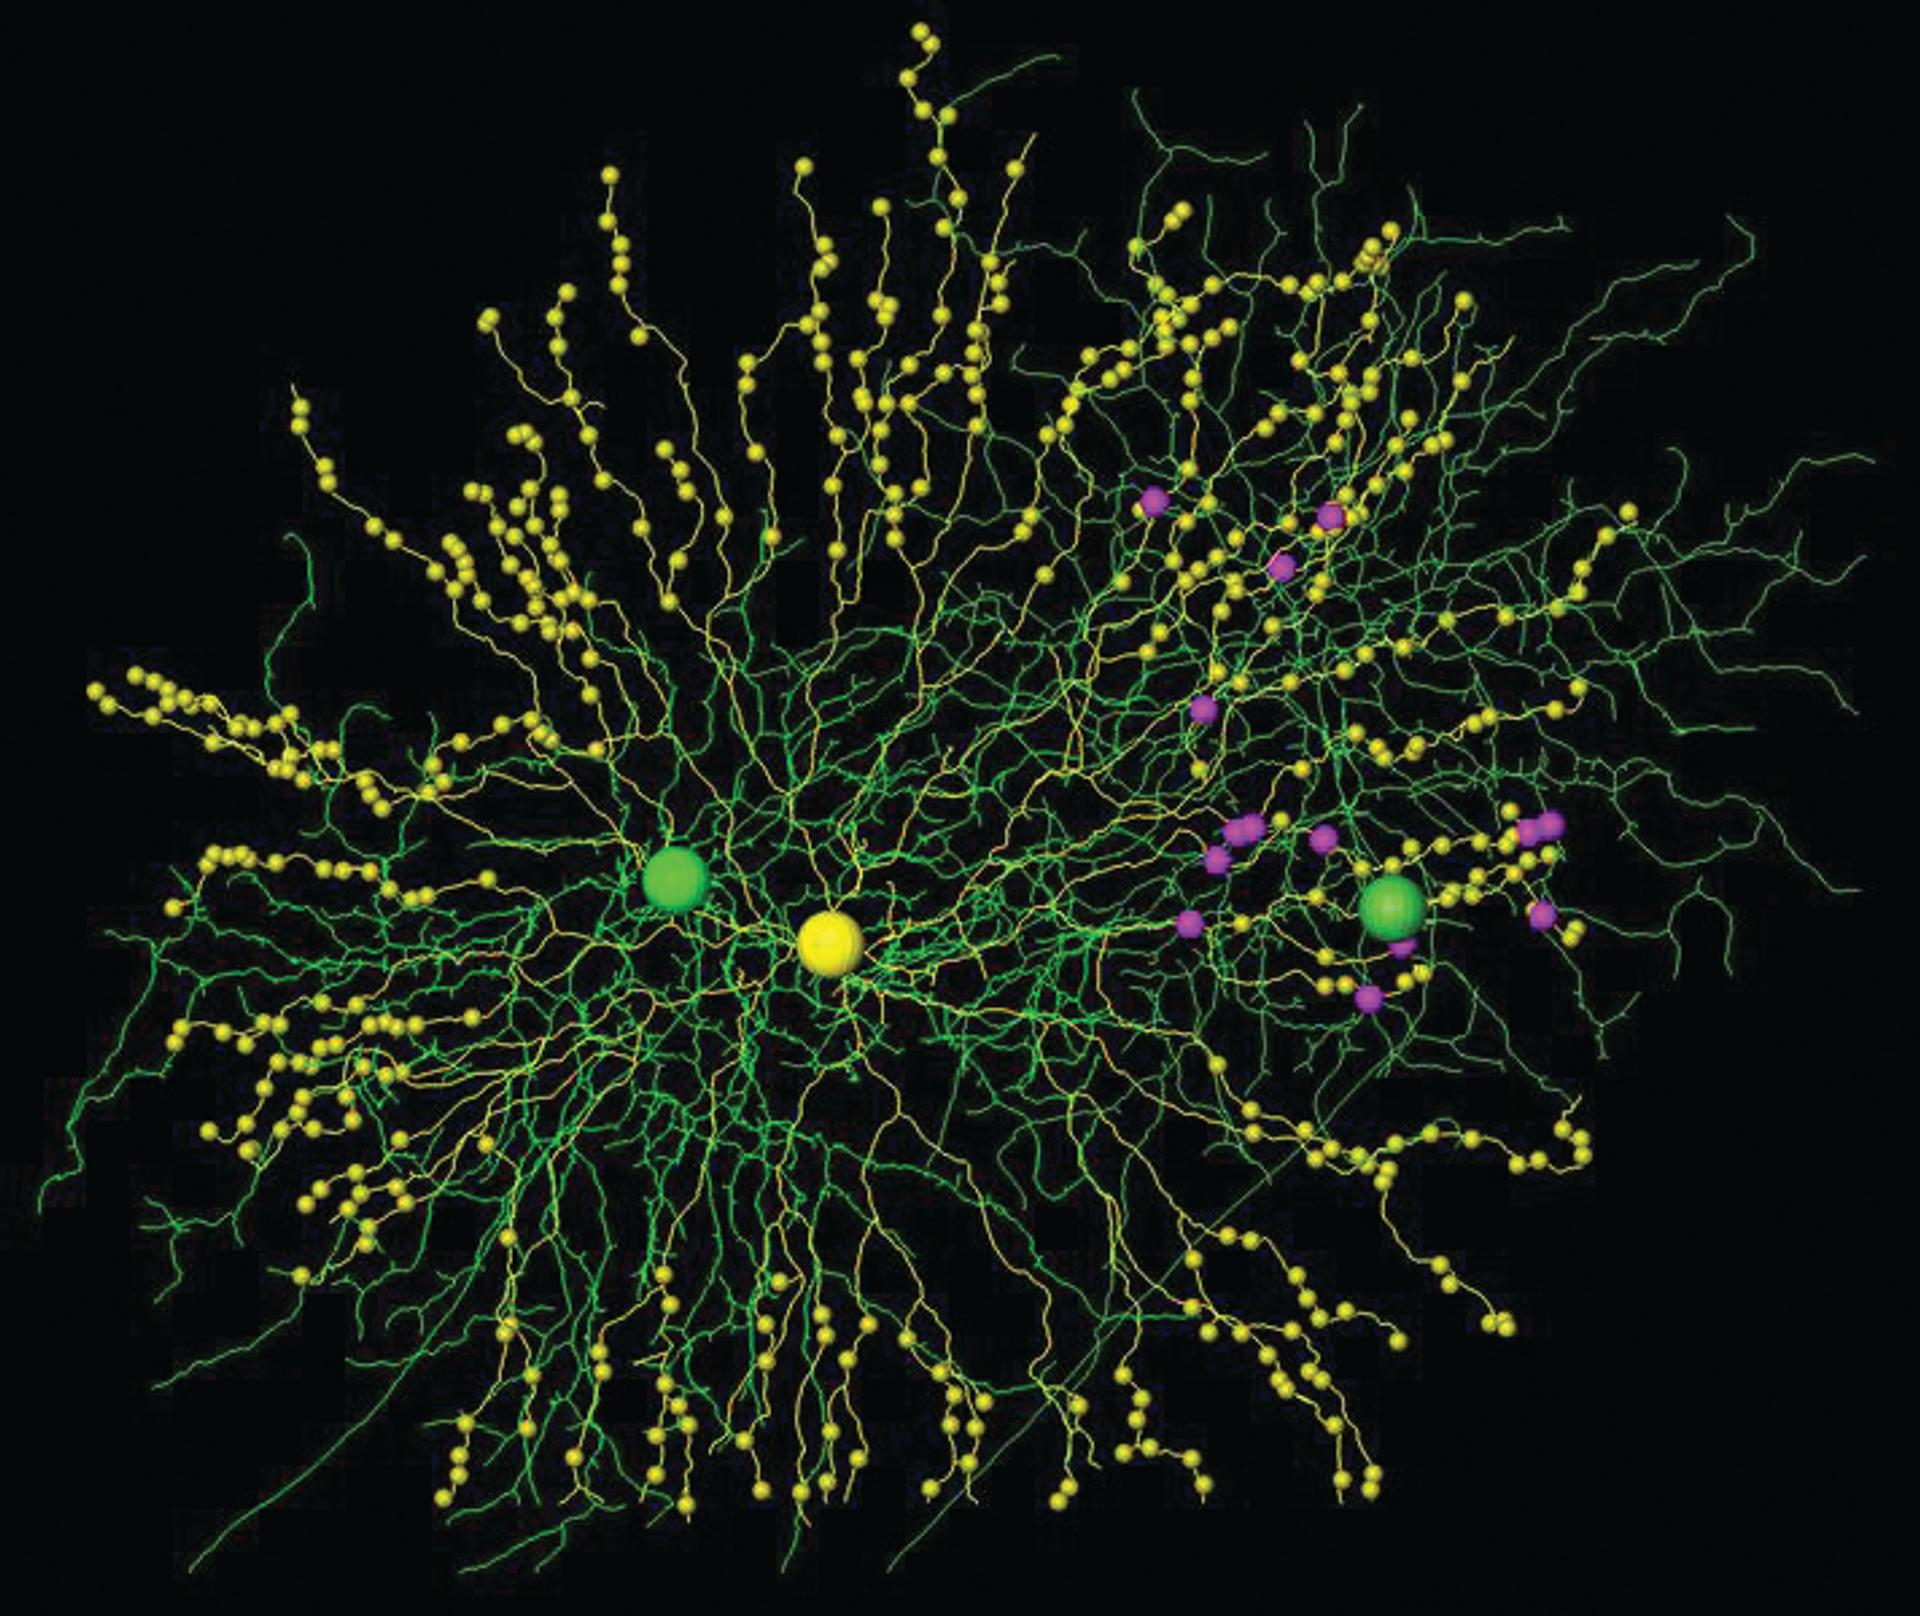 Cells and synapses reconstructed from serial block face electron microscopy data. A single starburst amacrine cell (yellow, note synaptic varicosities) and two direction-selective ganglion cells (green). Even though there is substantial dendritic overlap with both cells, all connections (magenta) go to the right ganglion cell.